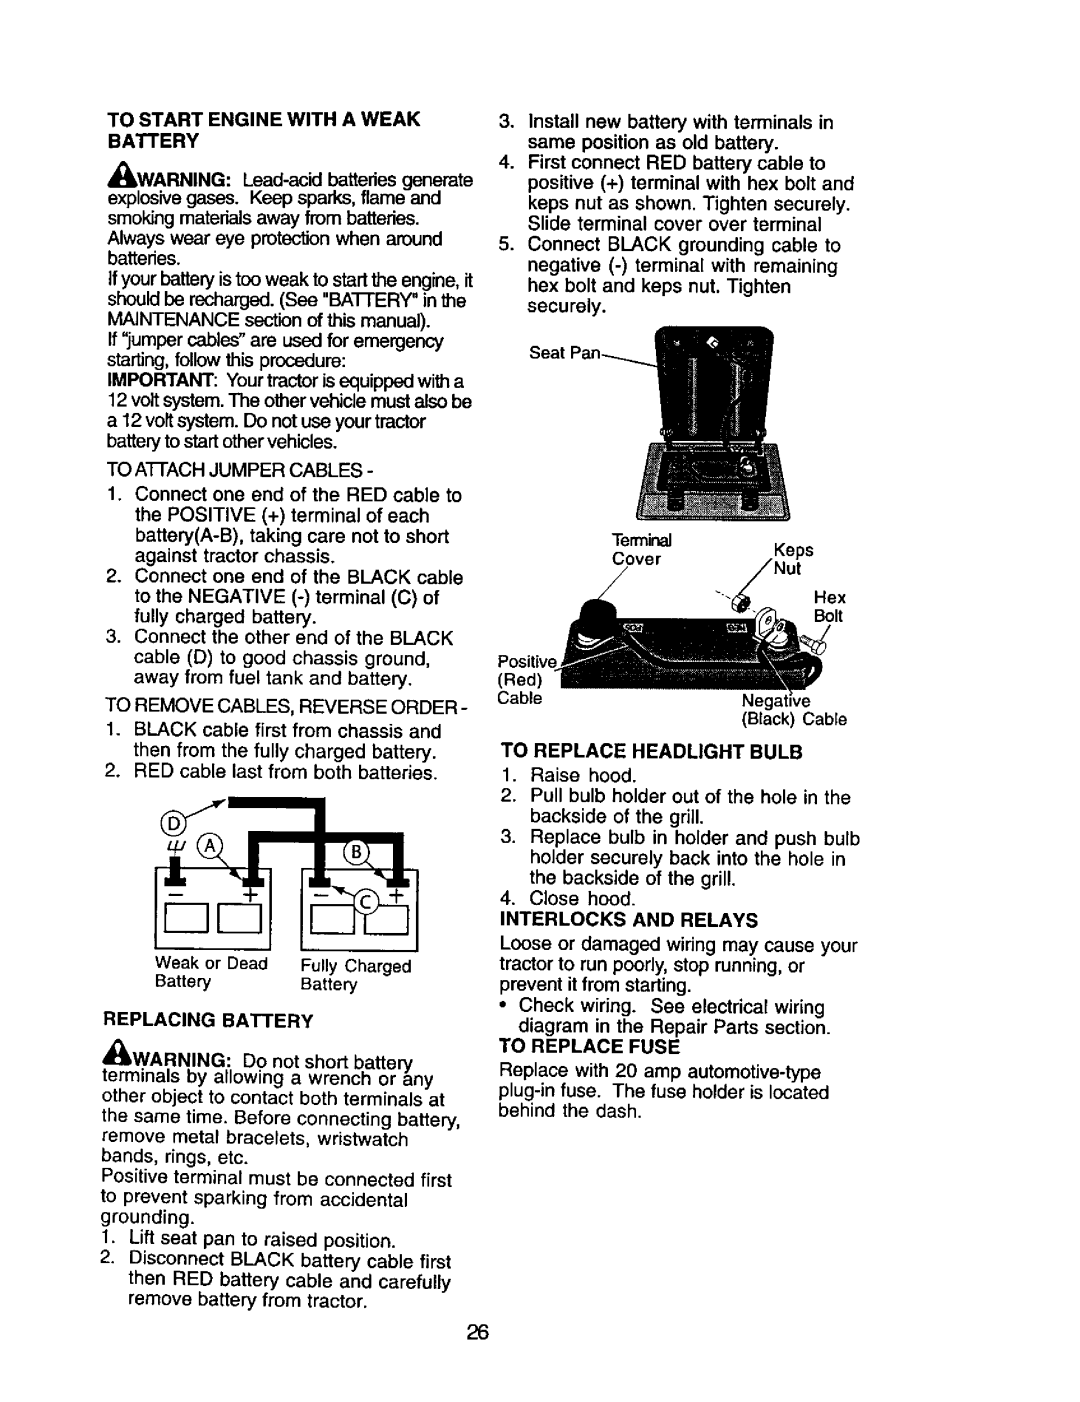 Craftsman 917.272068 owner manual To Start Engine With A Weak Battery 